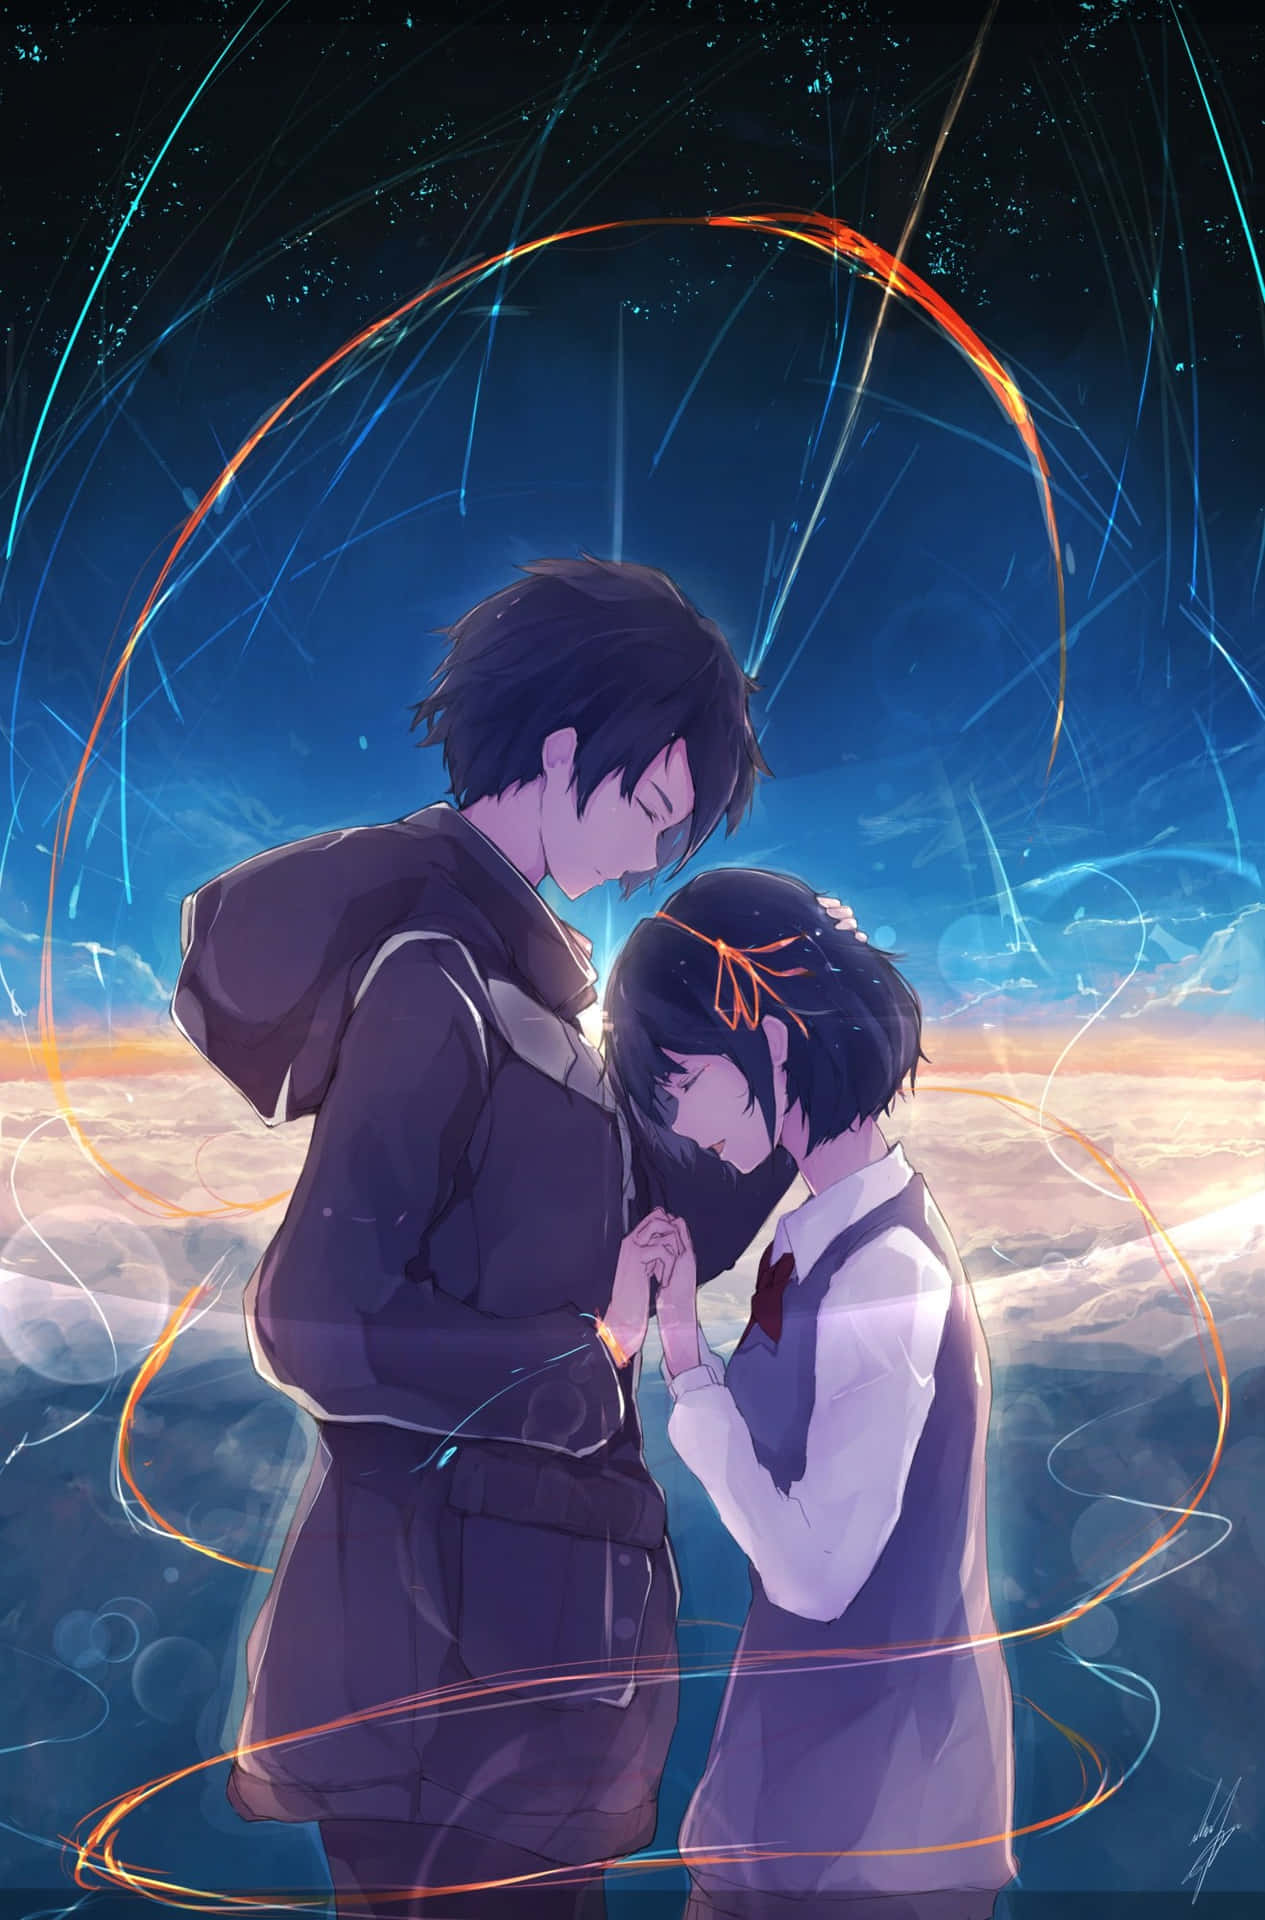 Two high schoolers, Mitsuha and Taki, connected by the stars.